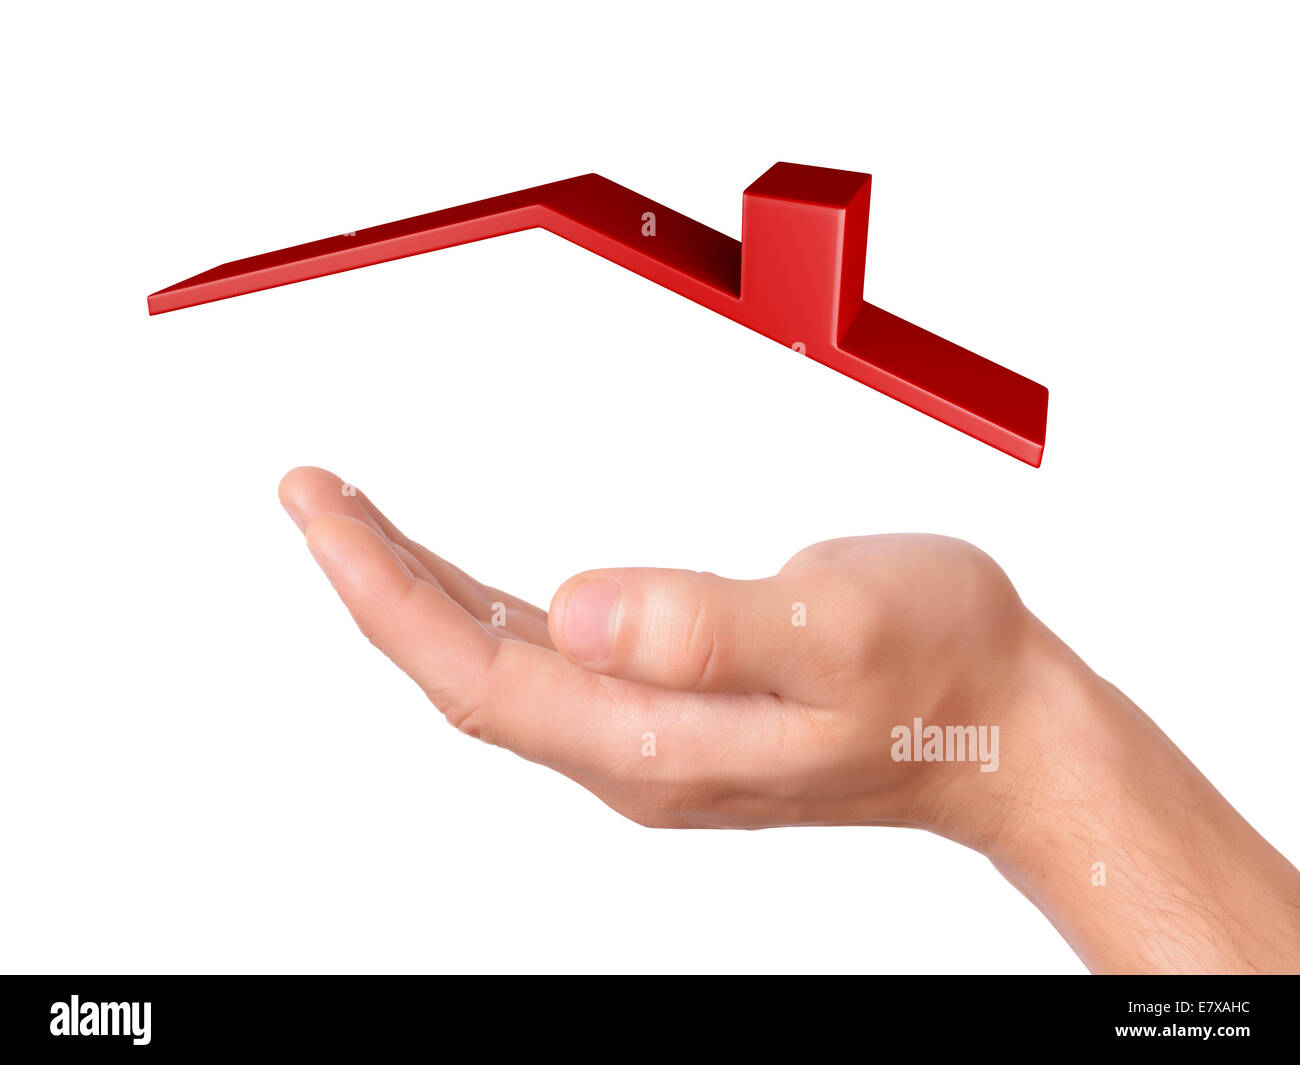 image of hand holding red  sold house isolated on white background Stock Photo